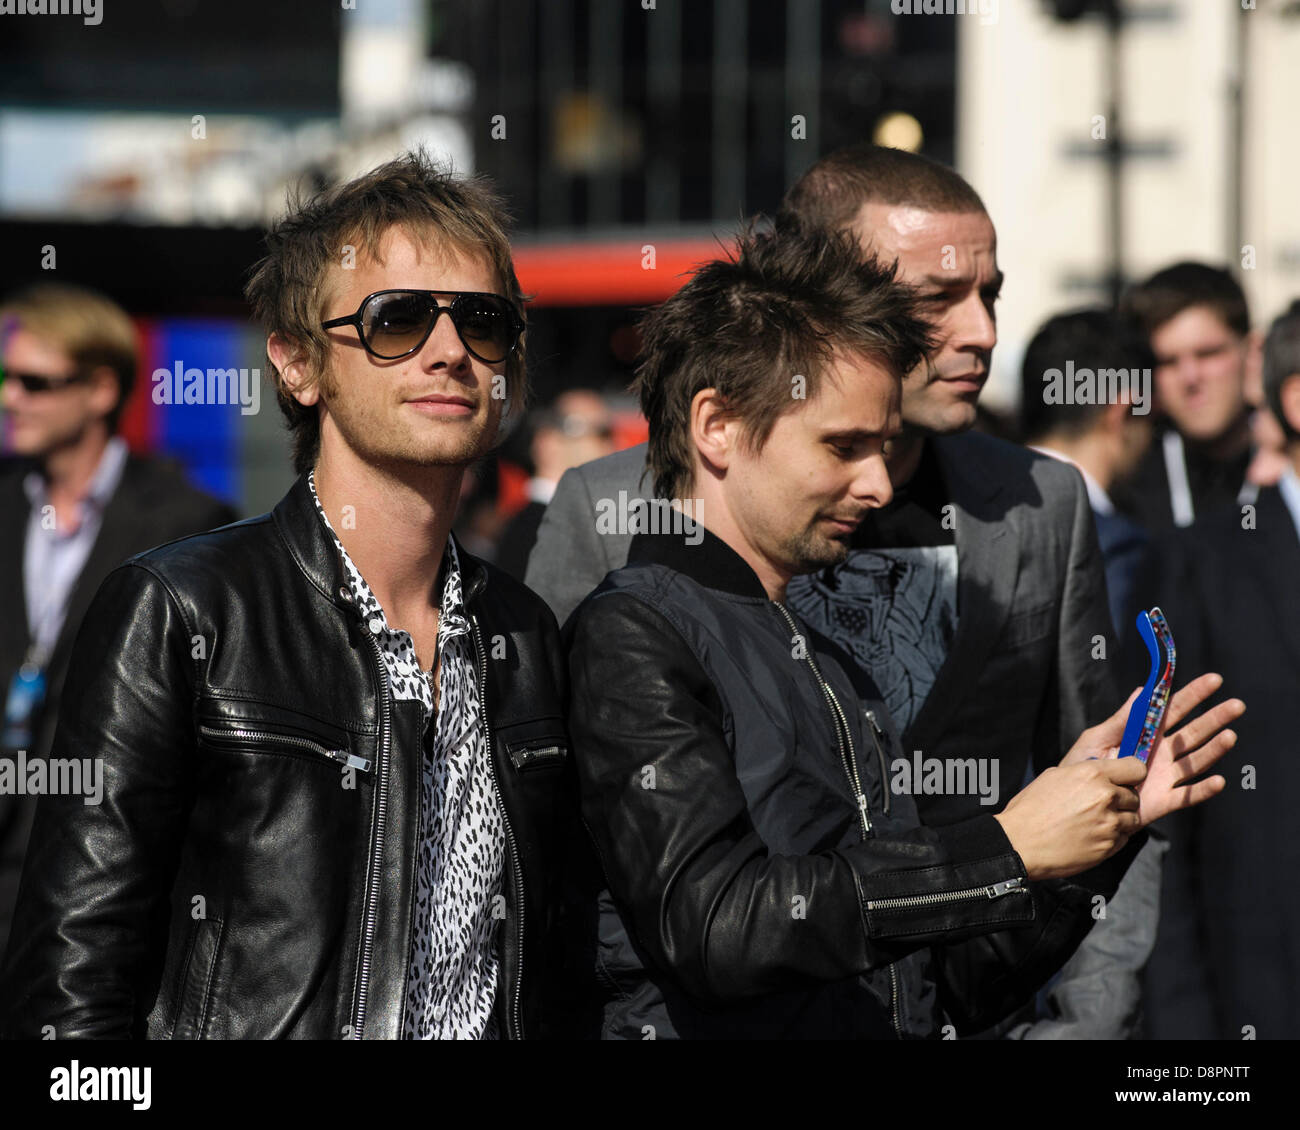 London, UK. 2nd June, 2013. Muse attends the World Premiere of World War Z at The Empire Leicester Square, London. Persons pictured: Dominic Howard, Matthew Bellamy, Chris Wolstenholme. Picture by Julie Edwards Stock Photo